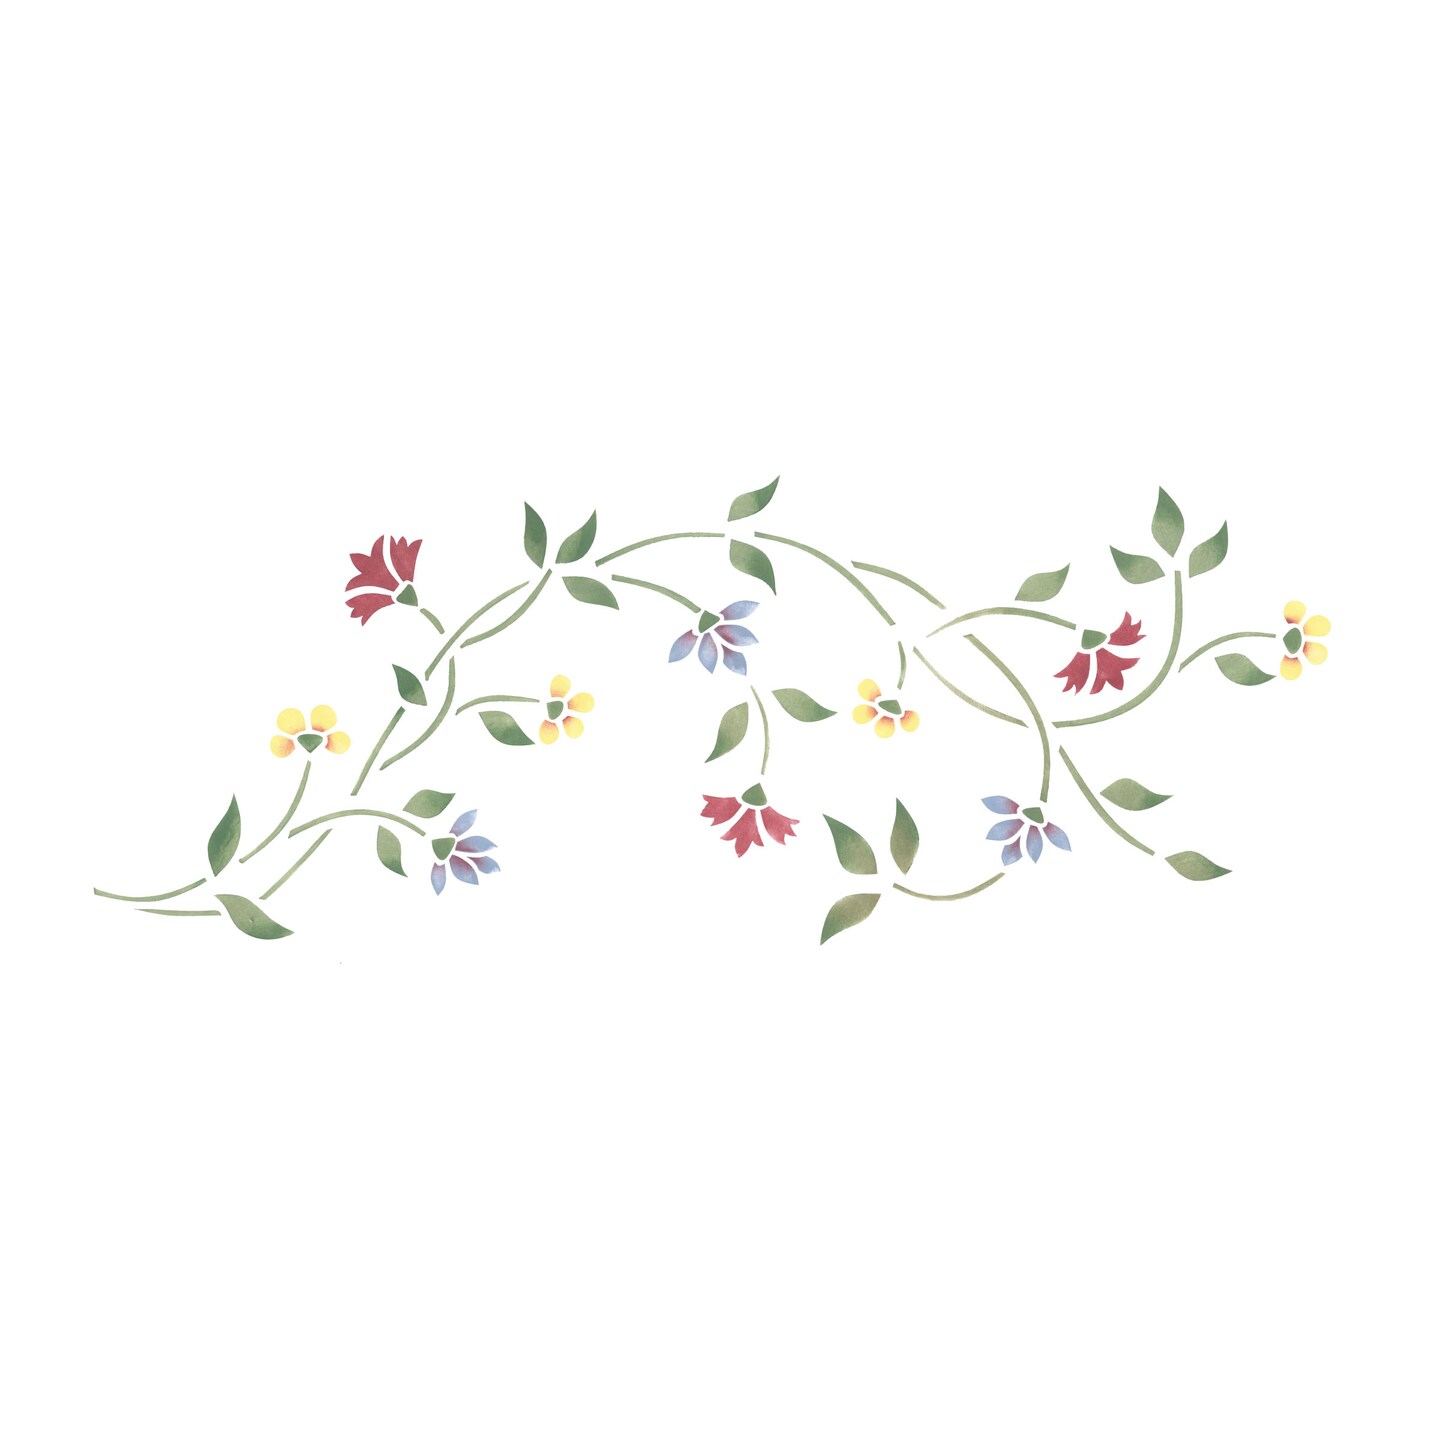 Small Floral Wall Stencil Border, 016 by Designer Stencils, Floral  Stencils, Reusable Art Craft Stencils for Painting on Walls, Canvas, Wood, Reusable Plastic Paint Stencil for Home Makeover